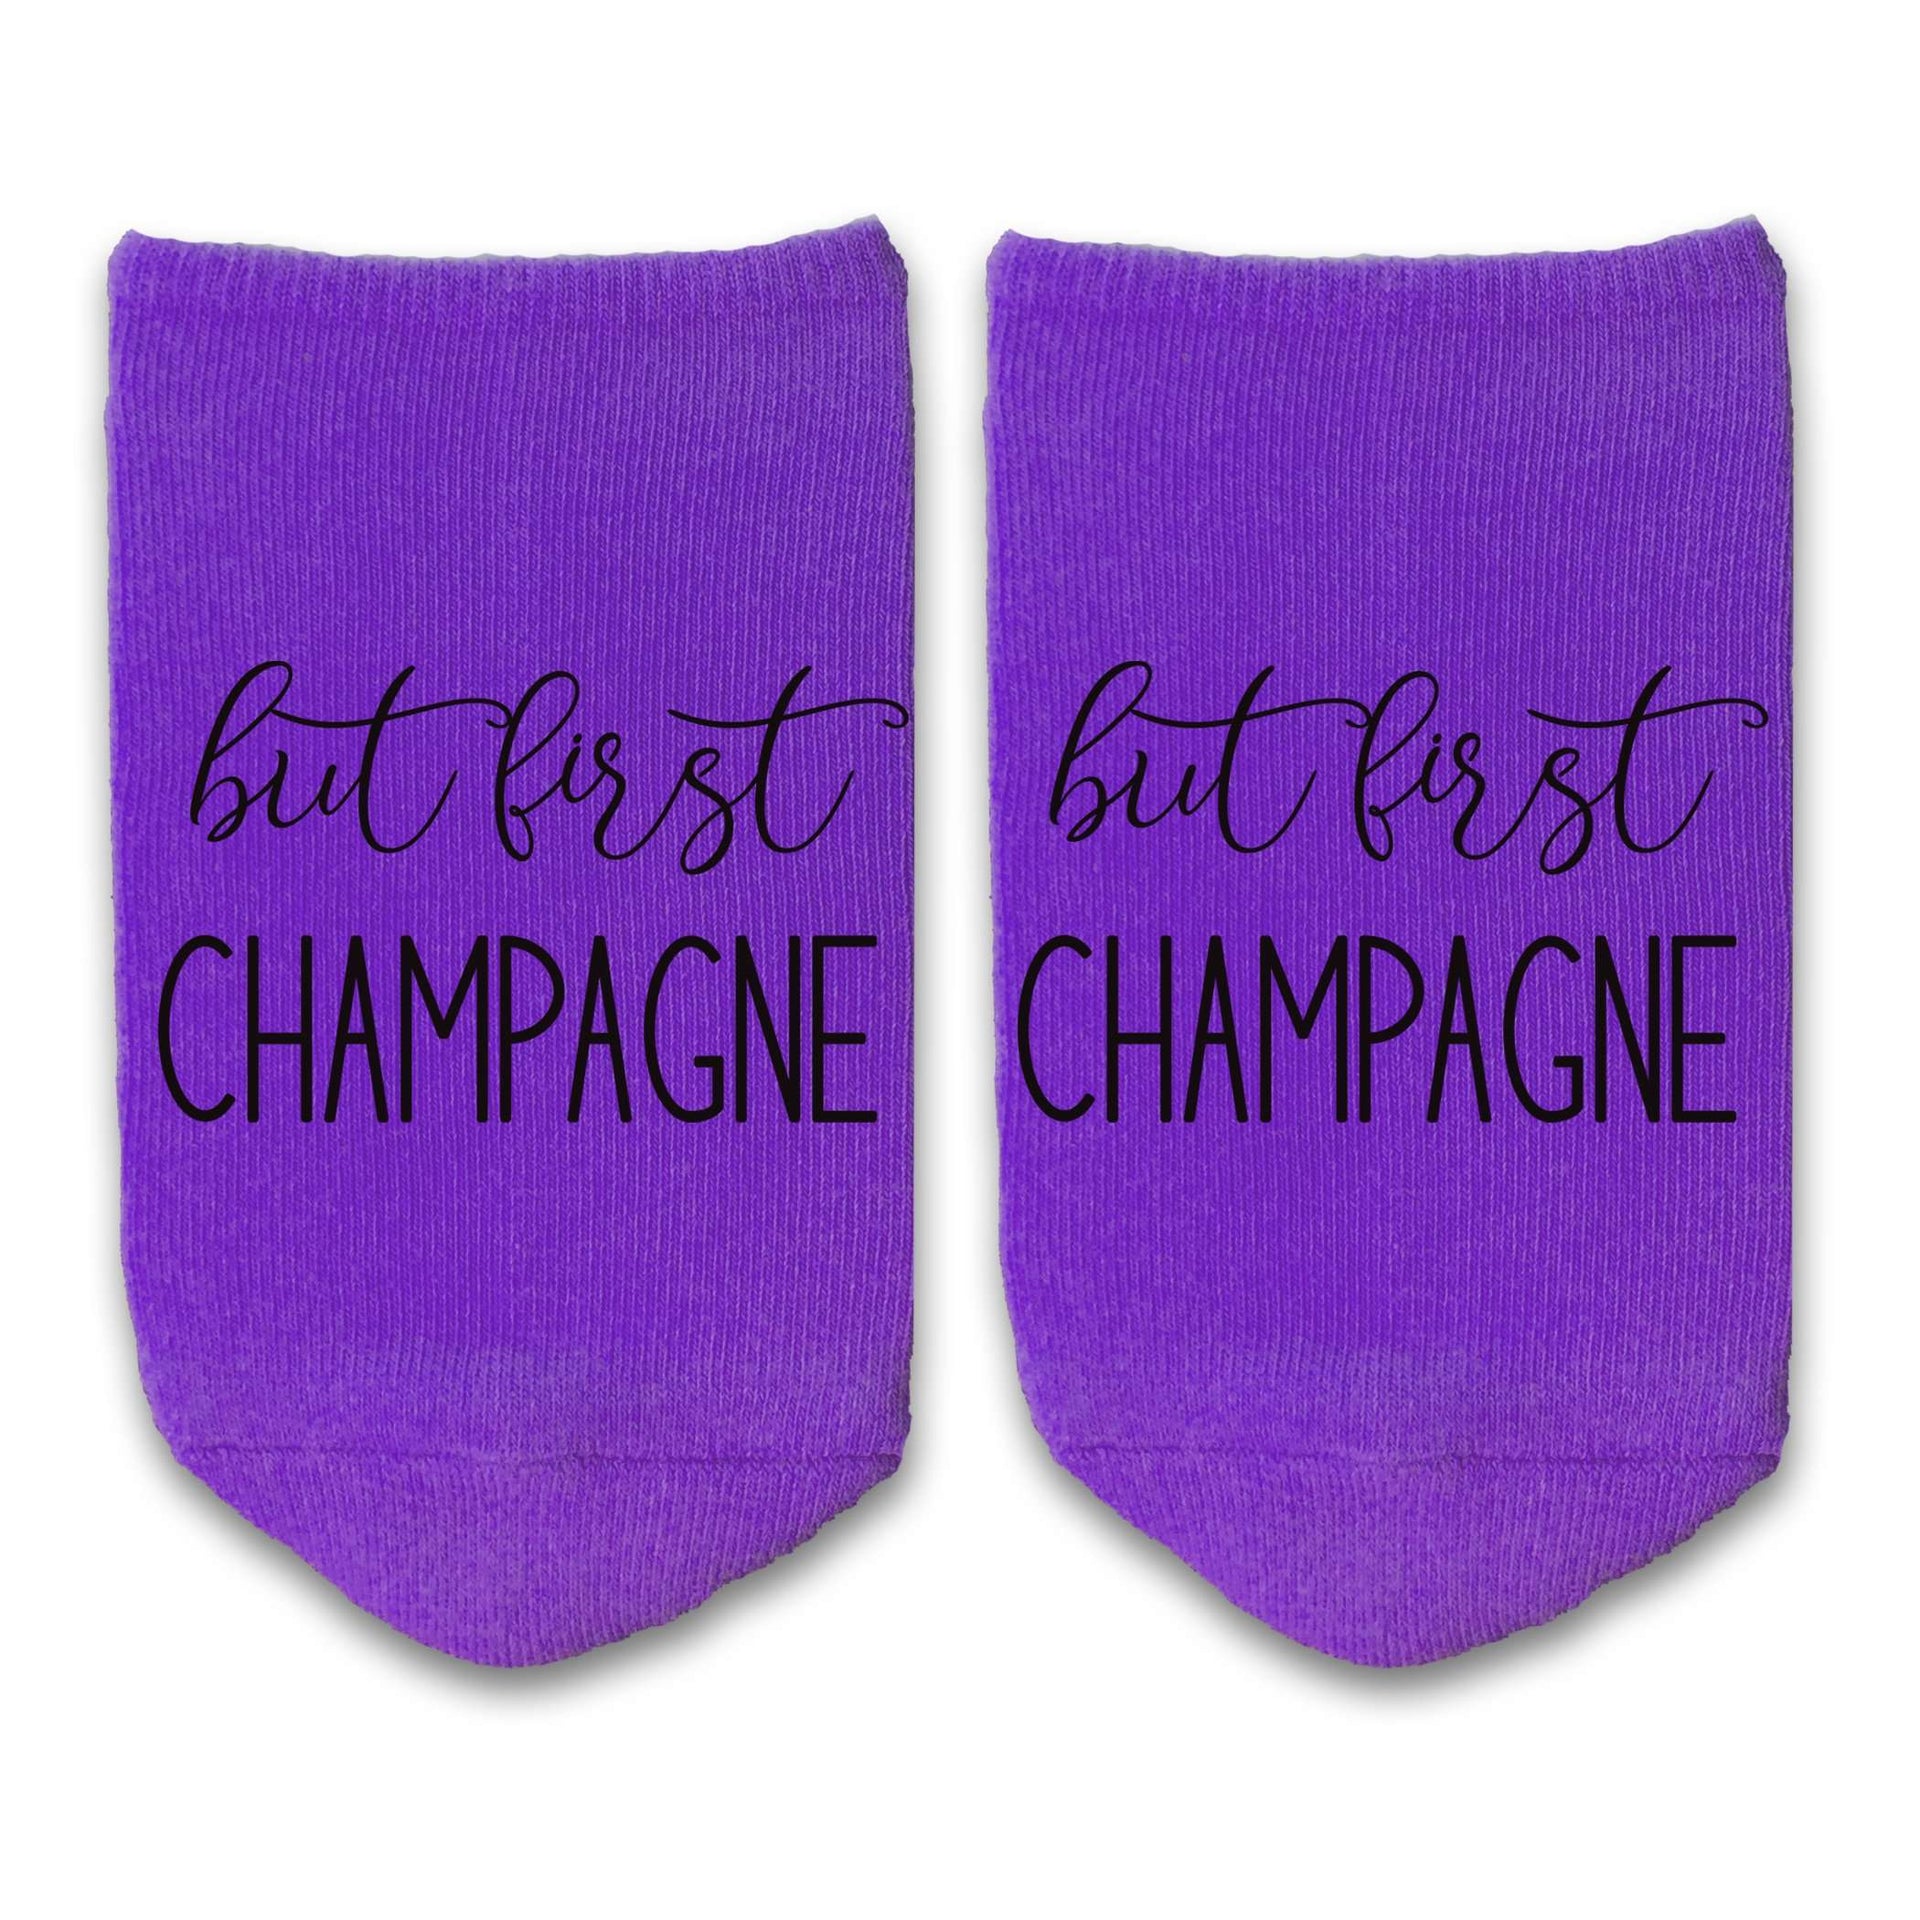 But first champagne custom printed on no show socks.